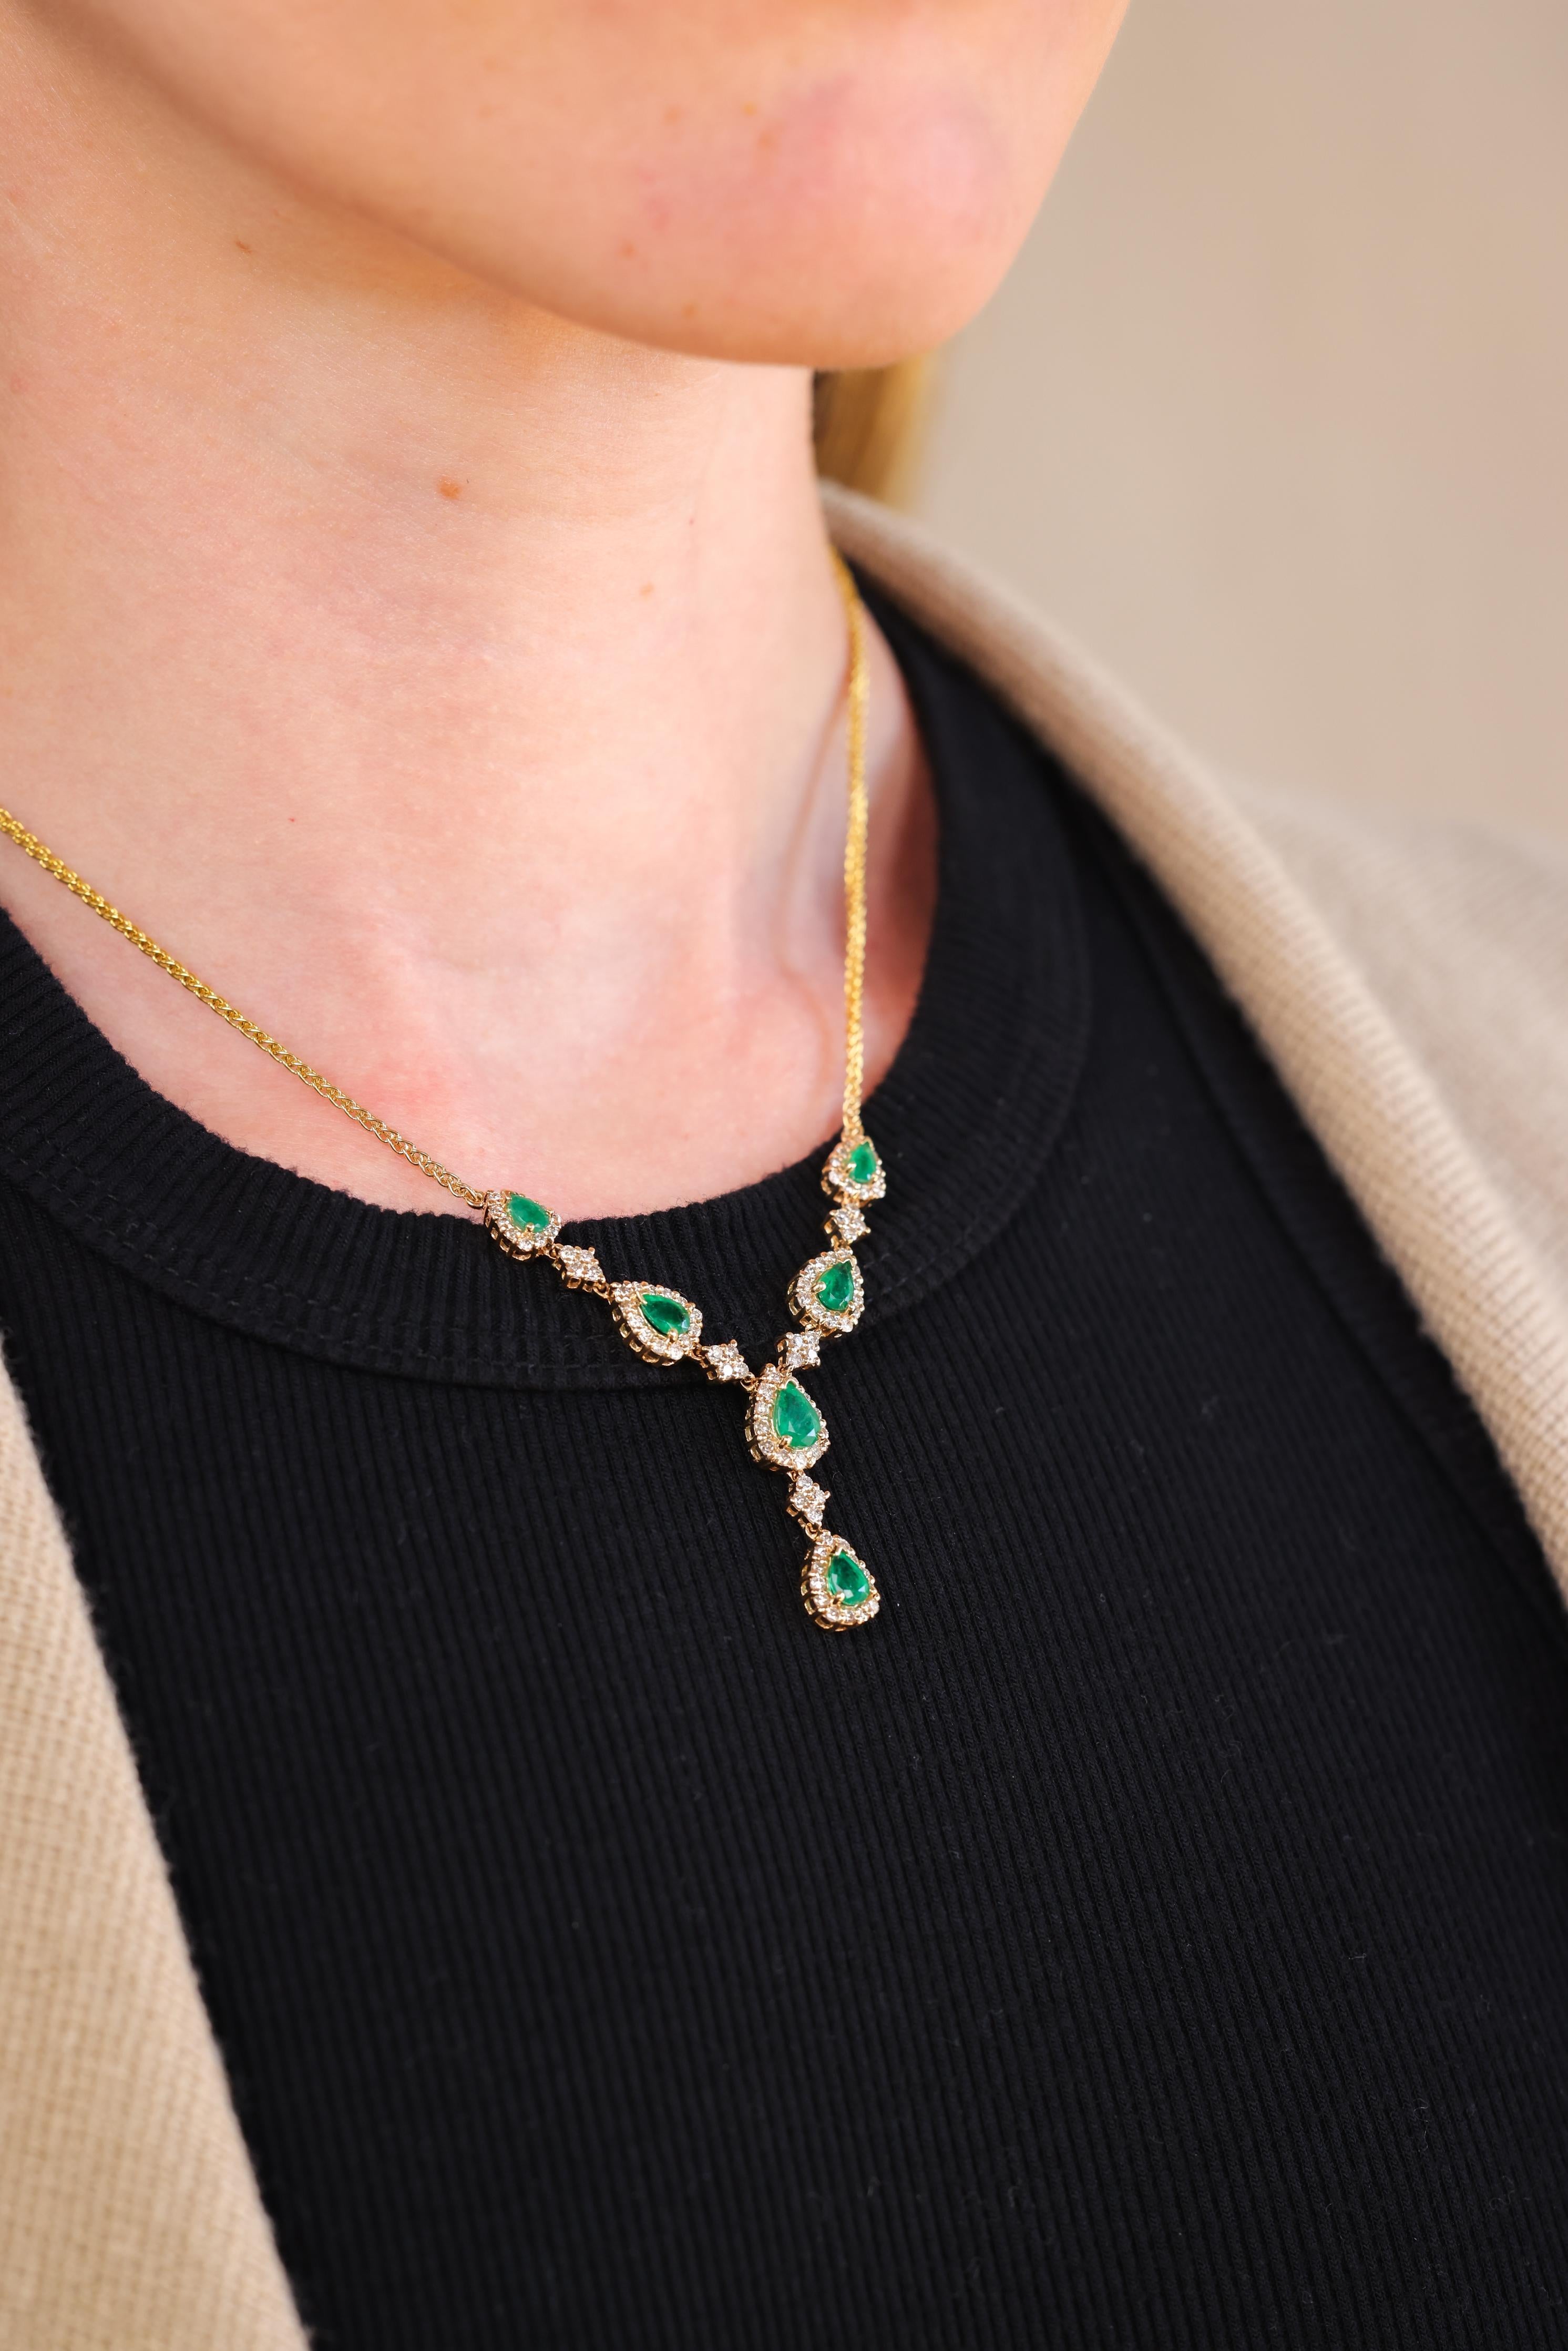 6 pear shape emerald weighing approximately 3.8 carats 
93 round brilliant cut diamonds approximately 0.70 carat 
H-I color
included
14k yellow gold 
circa 1980s 
17.5 inches long 

This exquisite necklace from the 1980s combines classic elegance